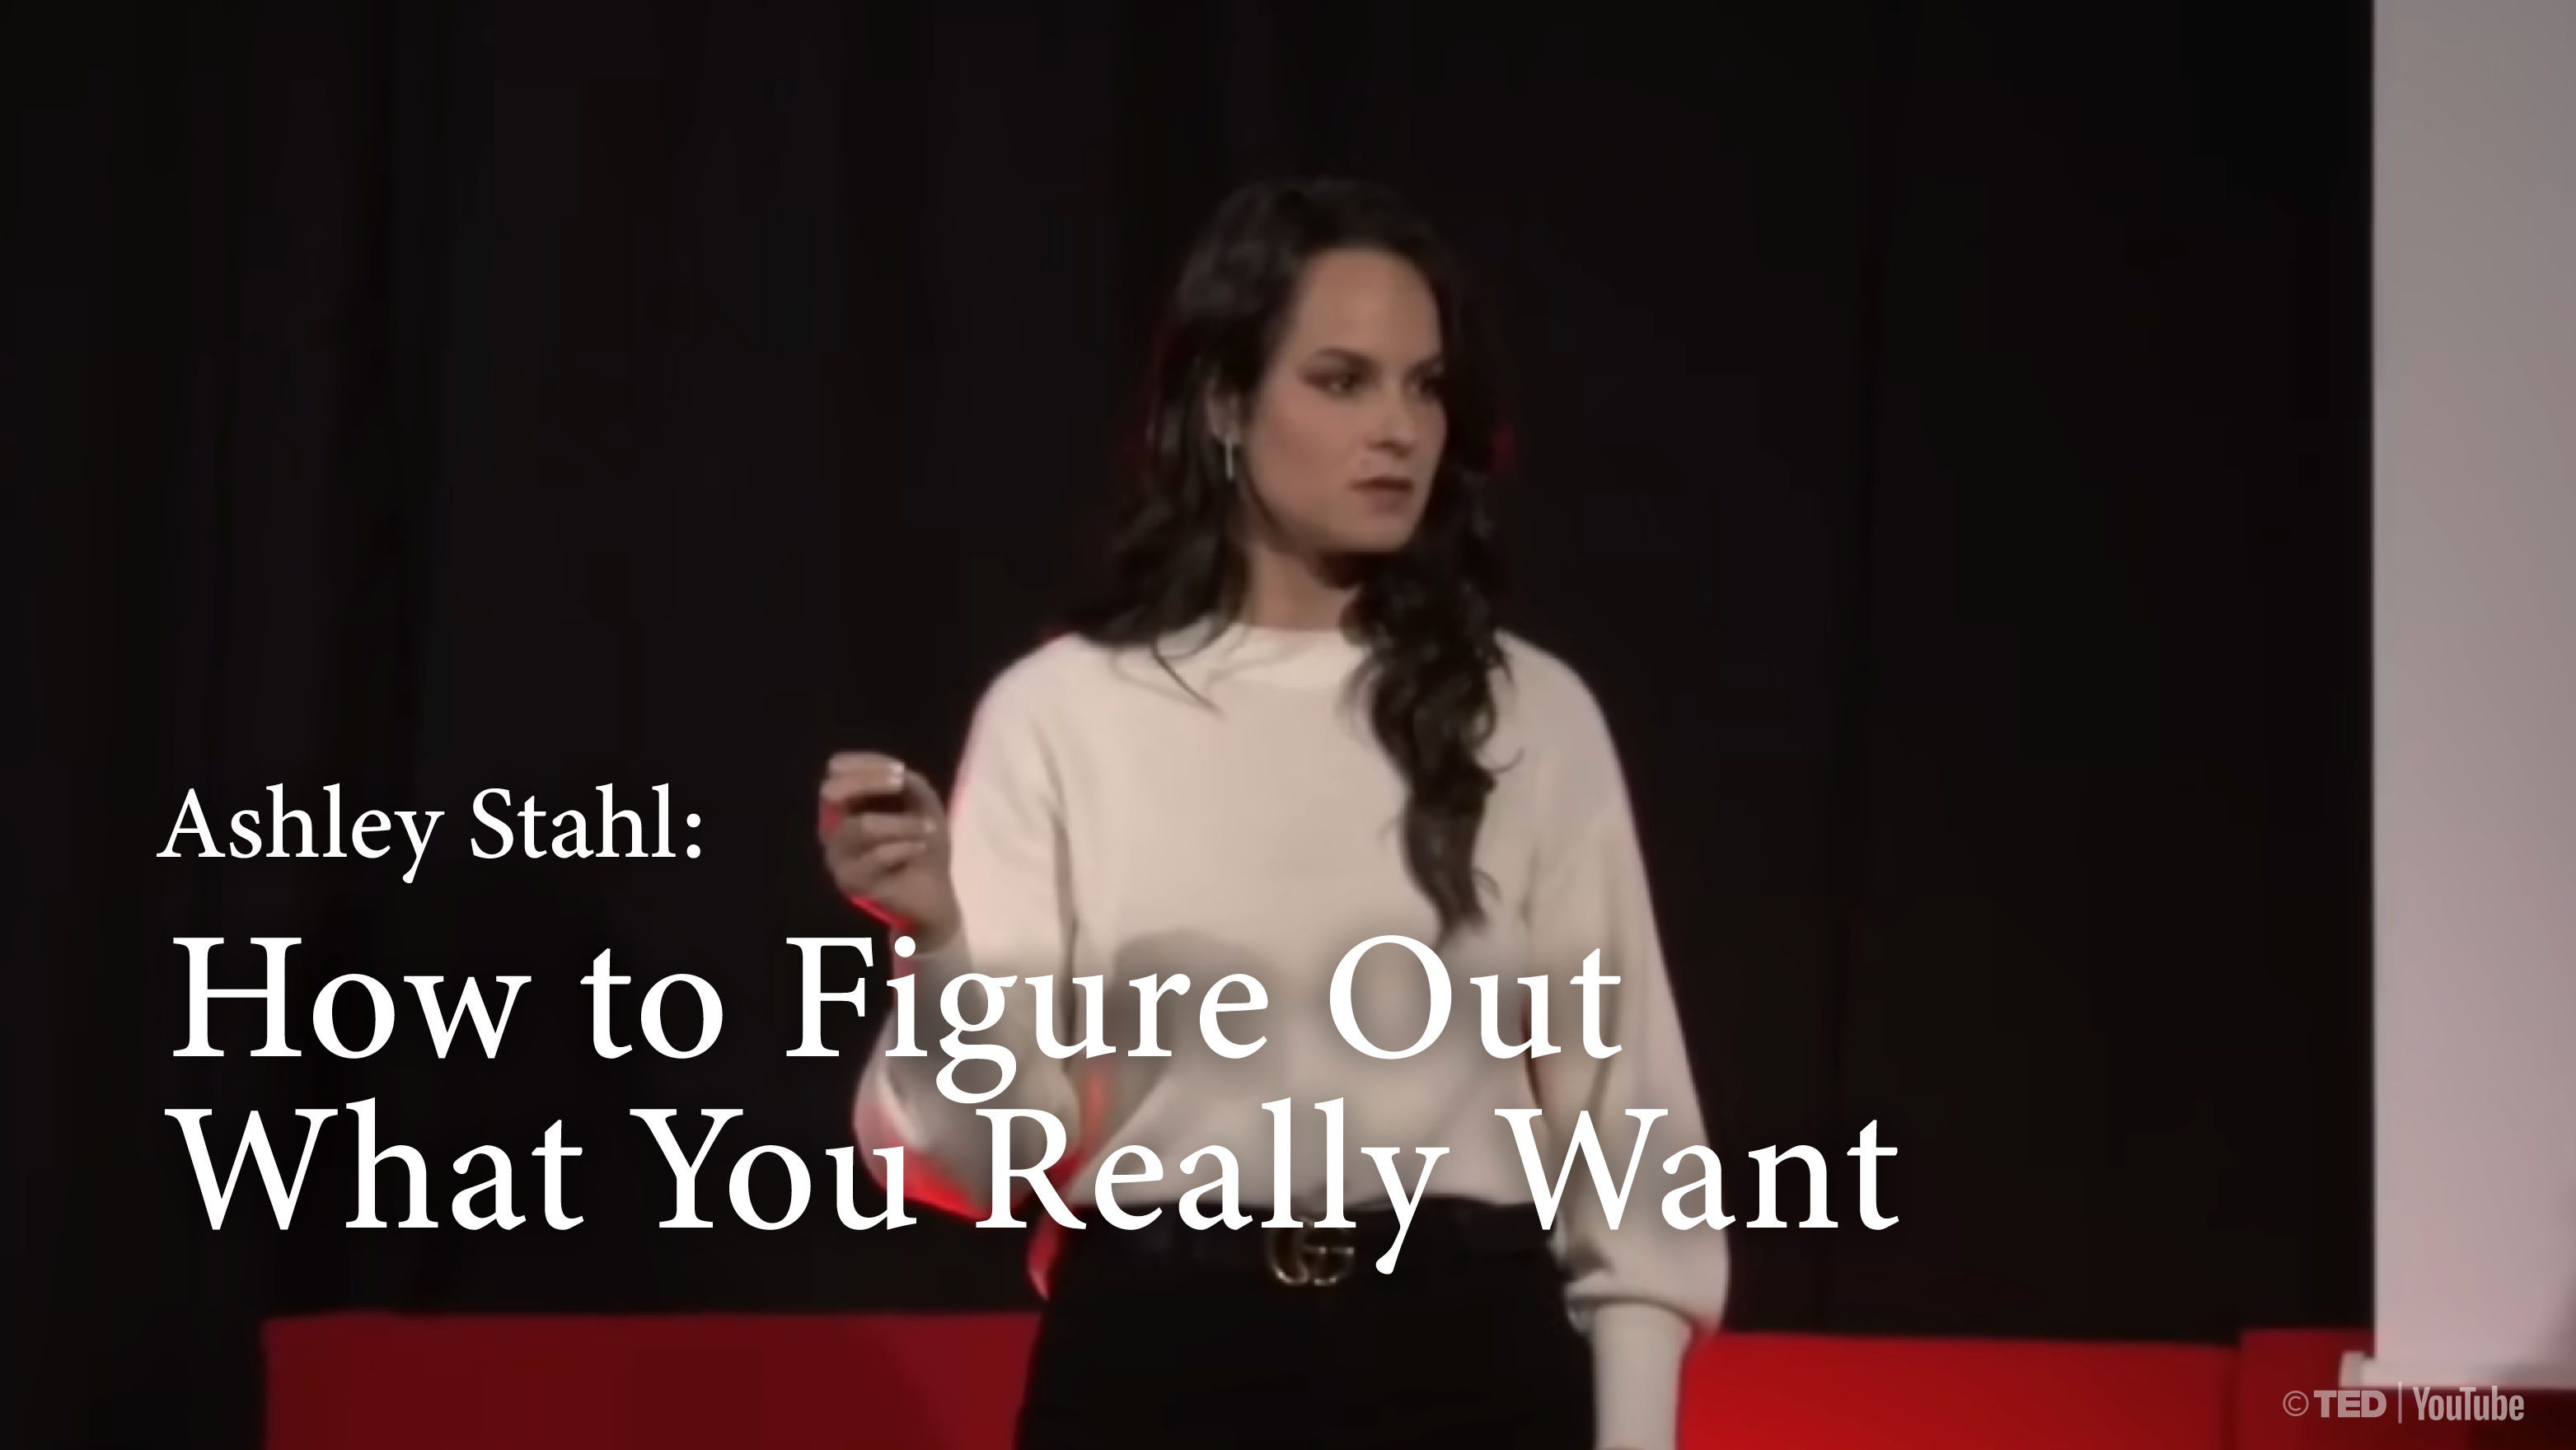 [B] How to Figure Out What You Really Want | Ashley Stahl [PRACTICE]